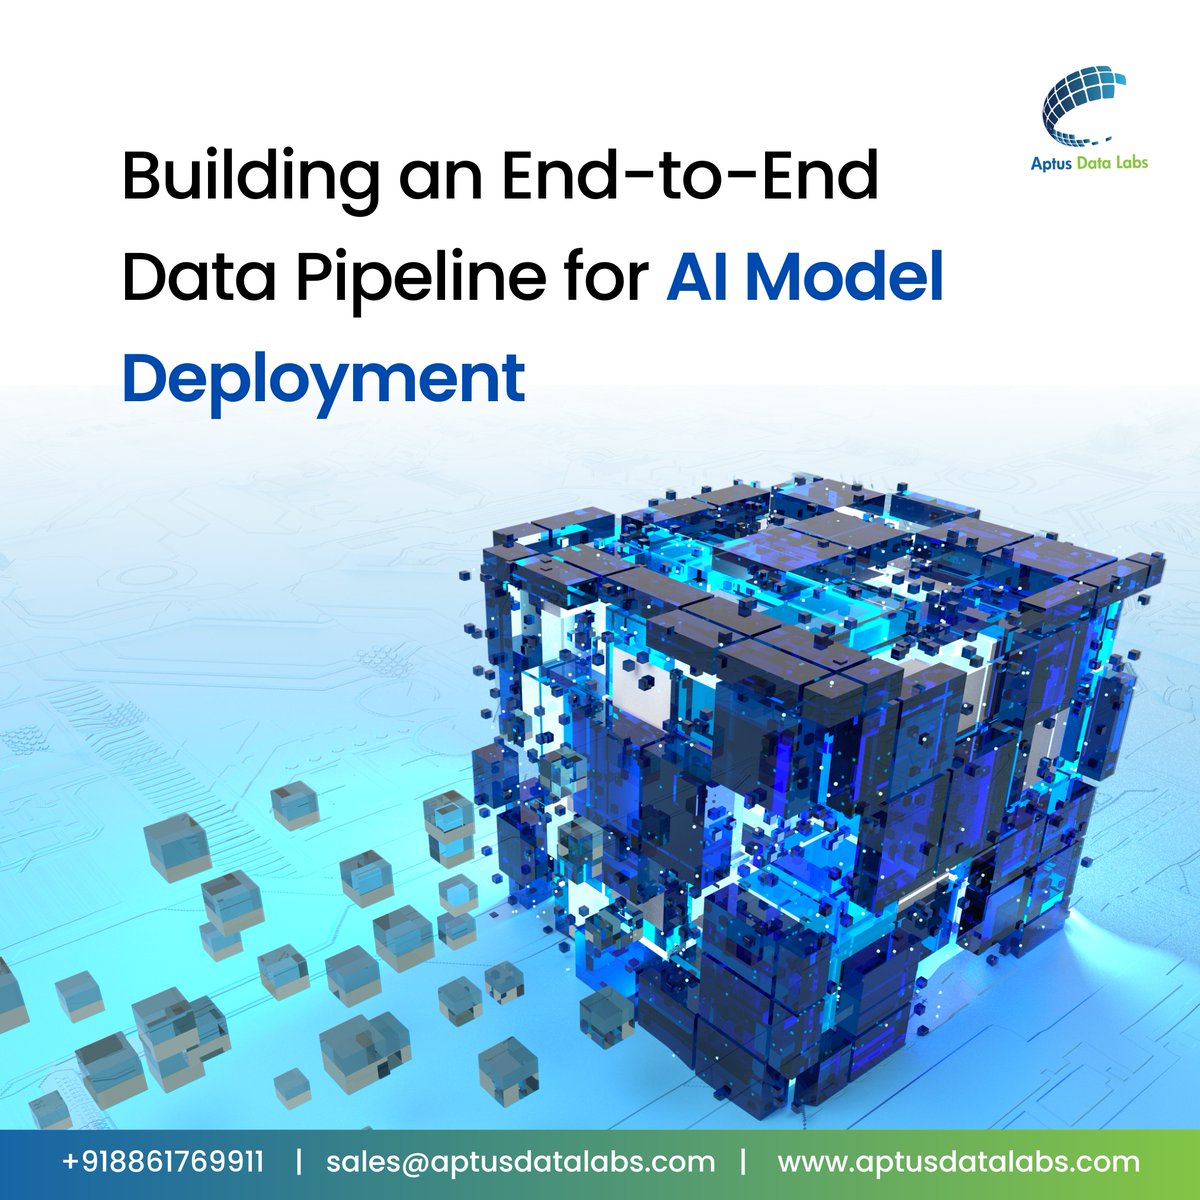 Excited to share my journey of building an end-to-end #DataPipeline for #AIModelDeployment! From data exploration to model training and deployment, it's been an exhilarating adventure. Join us as we unravel the secrets of unleashing the power of AI! #TechJourney #AI #DataScience